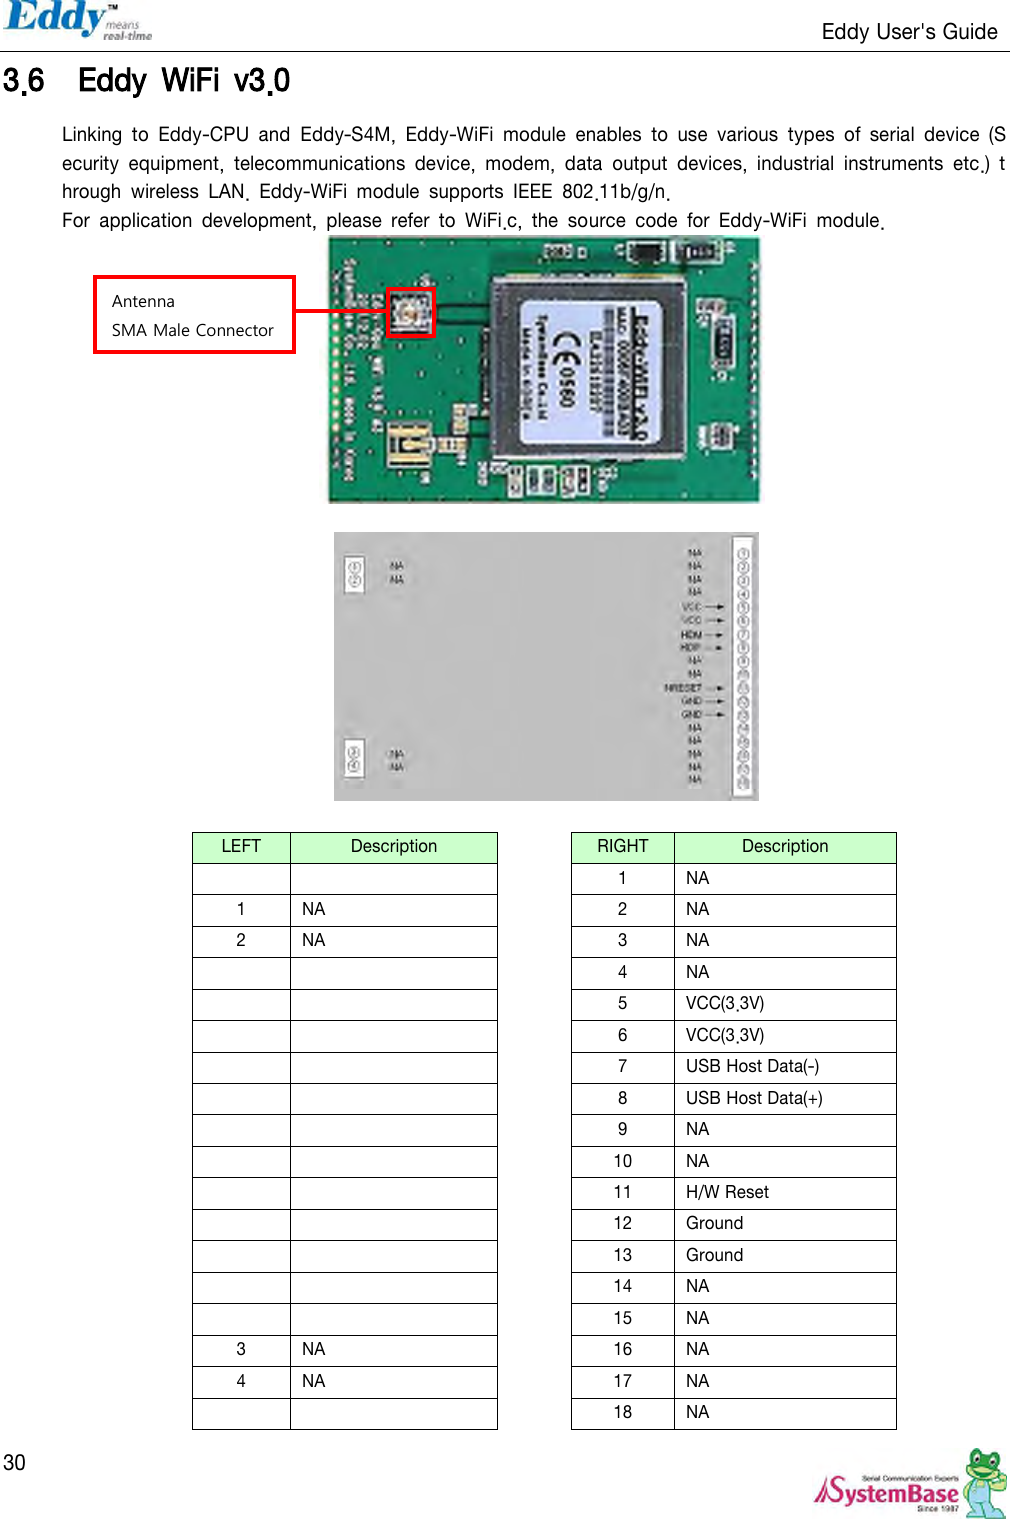                                                                   Eddy User&apos;s Guide   30 3.6 Eddy  WiFi  v3.0   Linking  to  Eddy-CPU  and  Eddy-S4M,  Eddy-WiFi  module  enables  to  use  various  types  of  serial  device  (Security  equipment,  telecommunications  device,  modem,  data  output  devices,  industrial  instruments  etc.)  through  wireless  LAN.  Eddy-WiFi  module  supports  IEEE  802.11b/g/n. For  application  development,  please  refer  to  WiFi.c,  the  source  code  for  Eddy-WiFi  module.     LEFT Description    RIGHT Description    1 NA 1 NA  2 NA 2 NA  3 NA    4 NA    5 VCC(3.3V)    6 VCC(3.3V)    7 USB Host Data(-)    8 USB Host Data(+)    9 NA    10 NA    11 H/W Reset    12 Ground    13 Ground    14 NA    15 NA 3 NA  16 NA 4 NA  17 NA    18 NA Antenna SMA Male Connector 